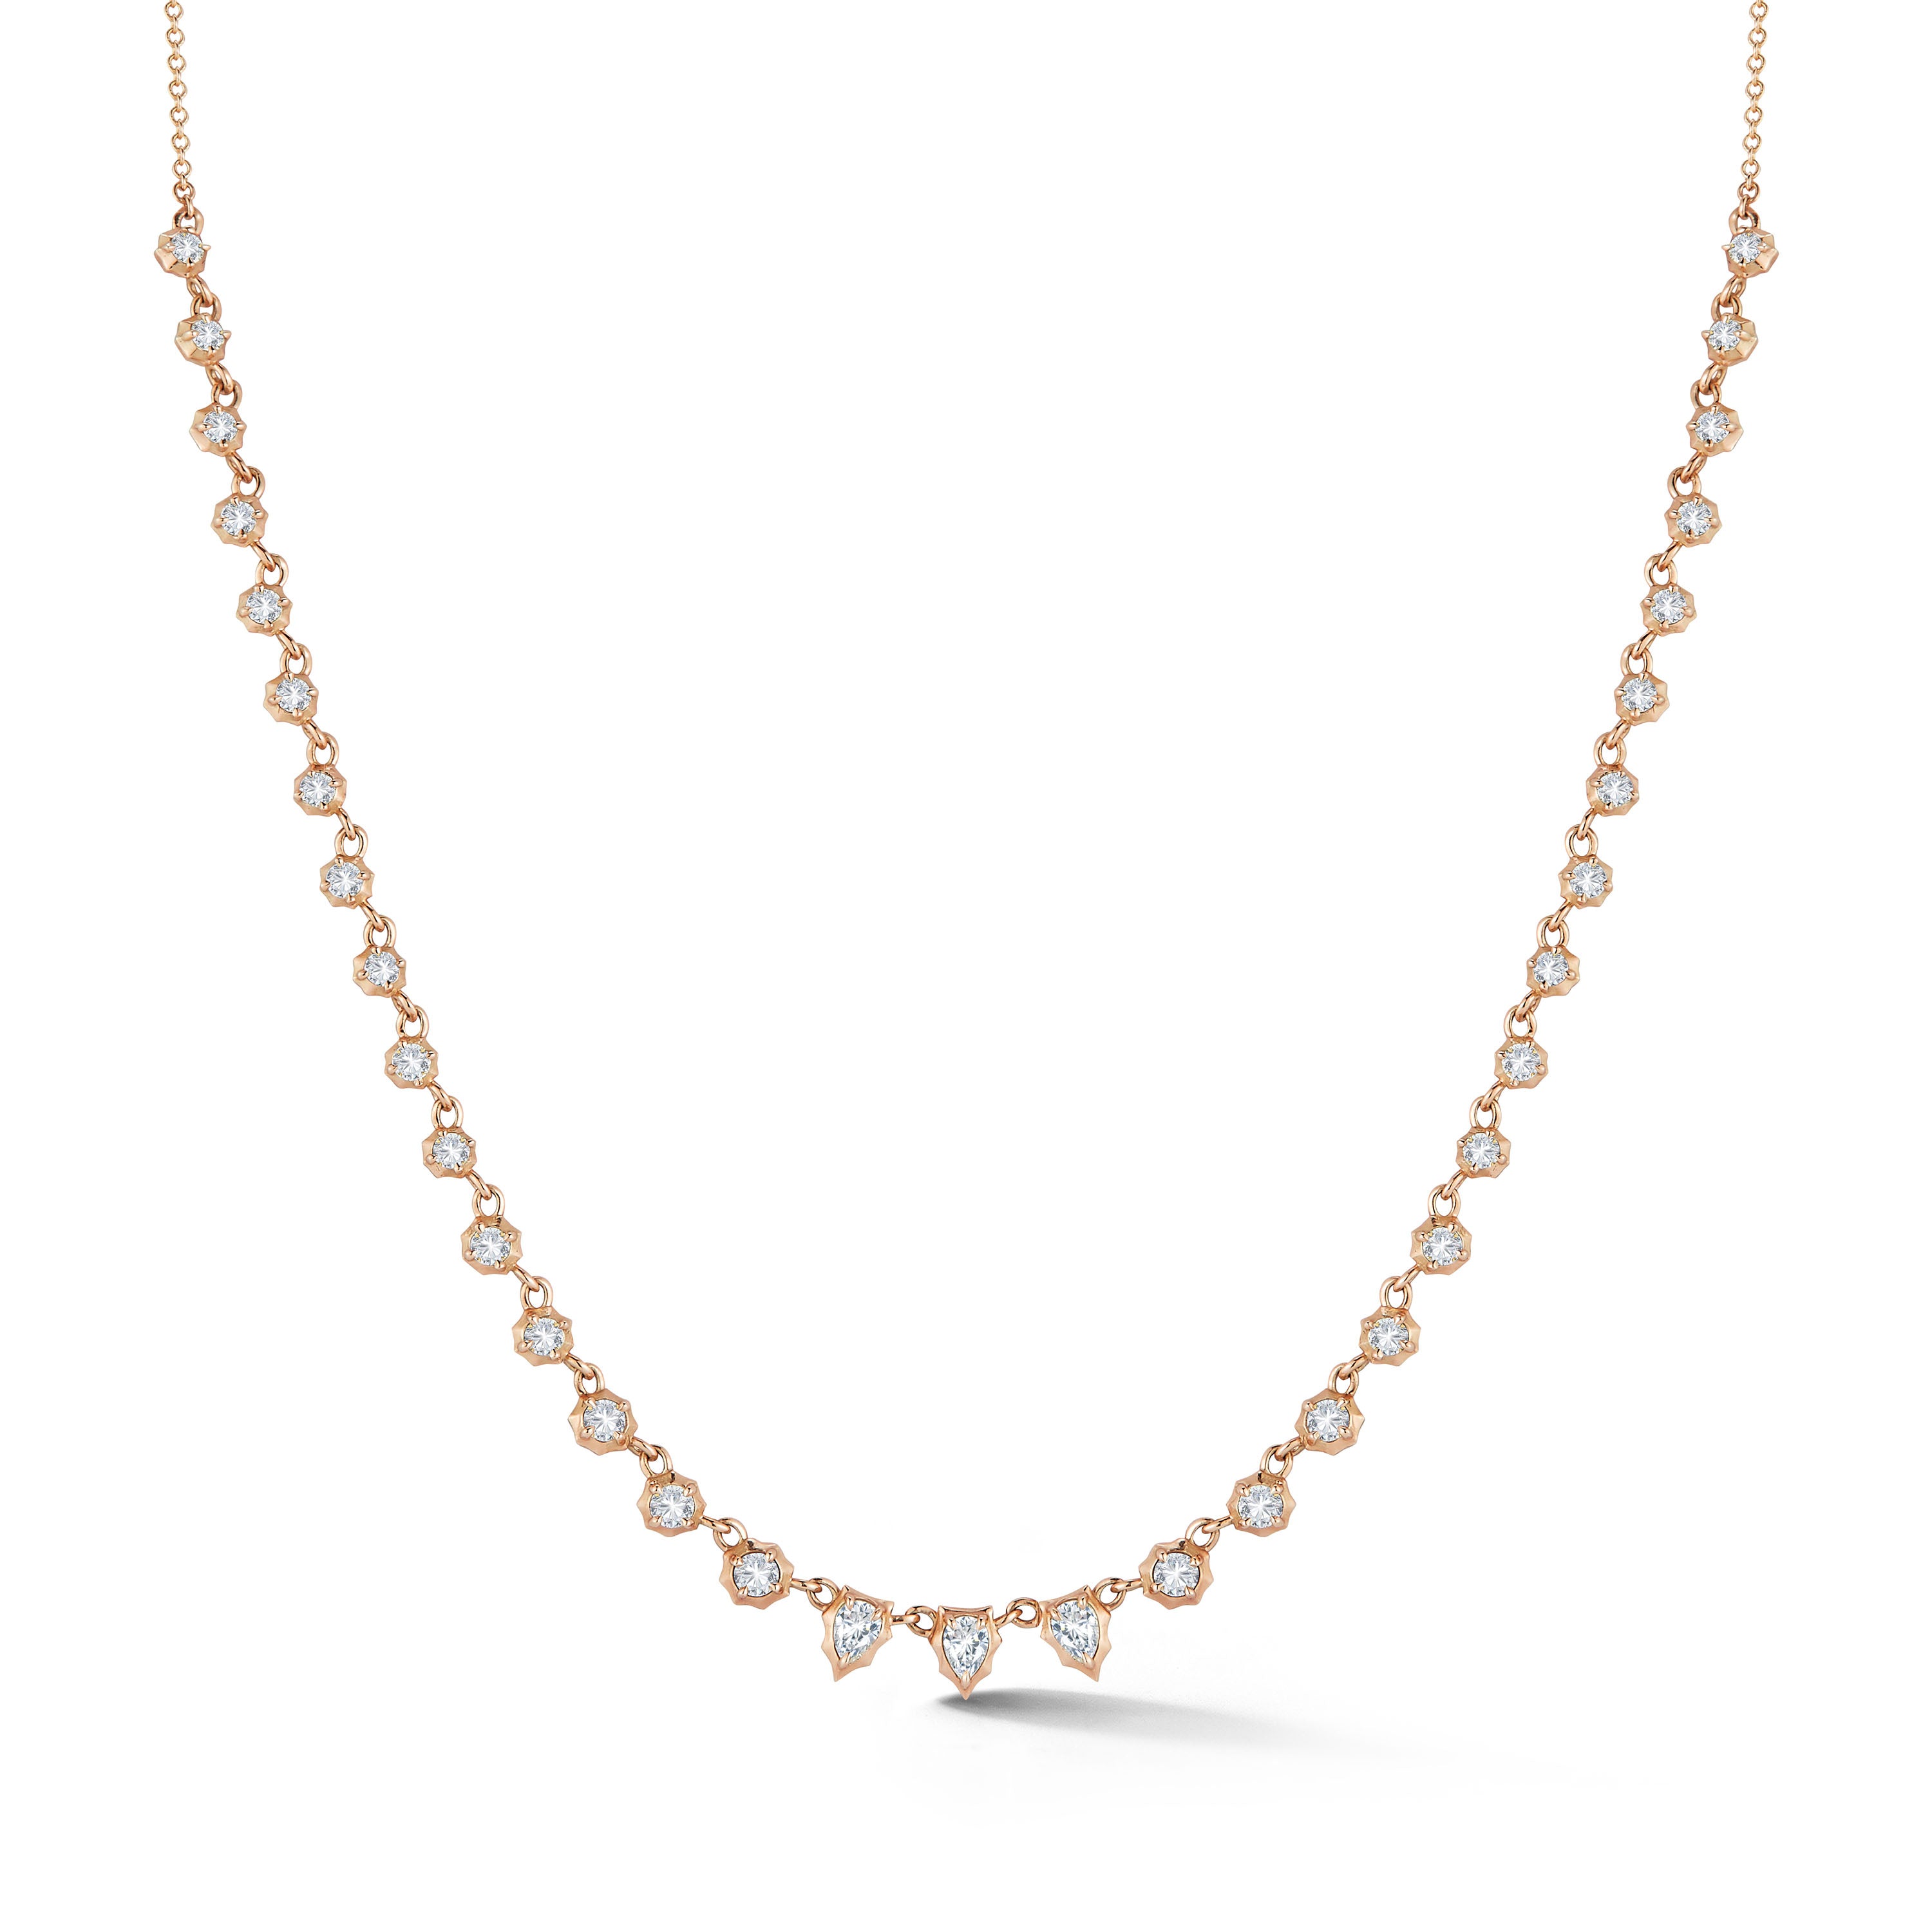 Small Envoy Riviera Necklace in 18K Rose Gold